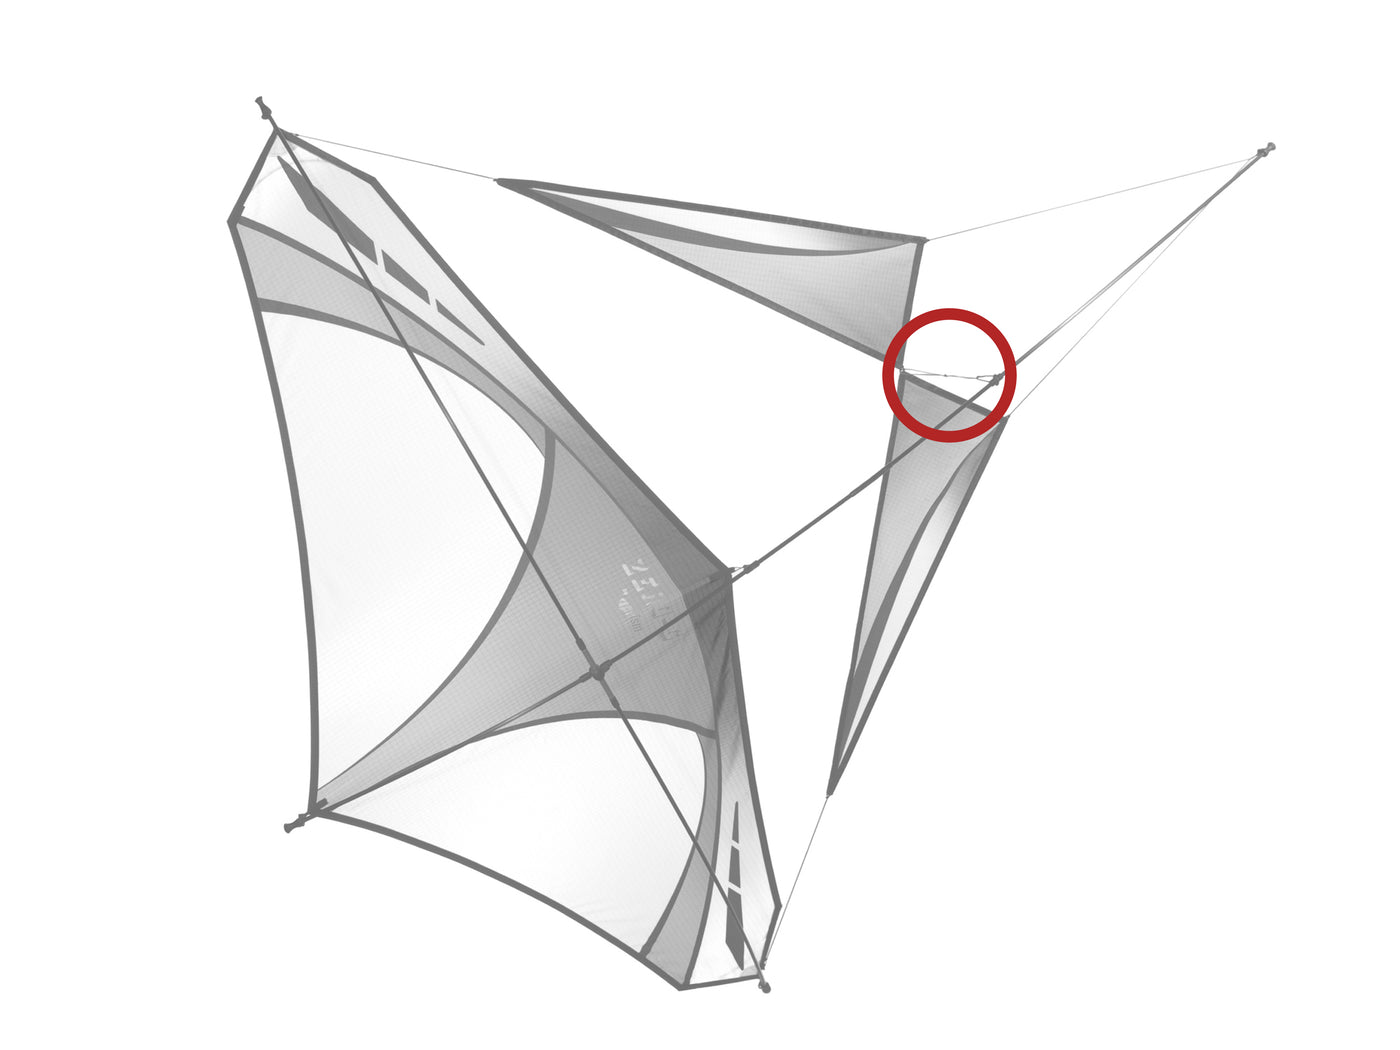 Diagram showing location of the Zero G Nose Tension Bridle on the kite.